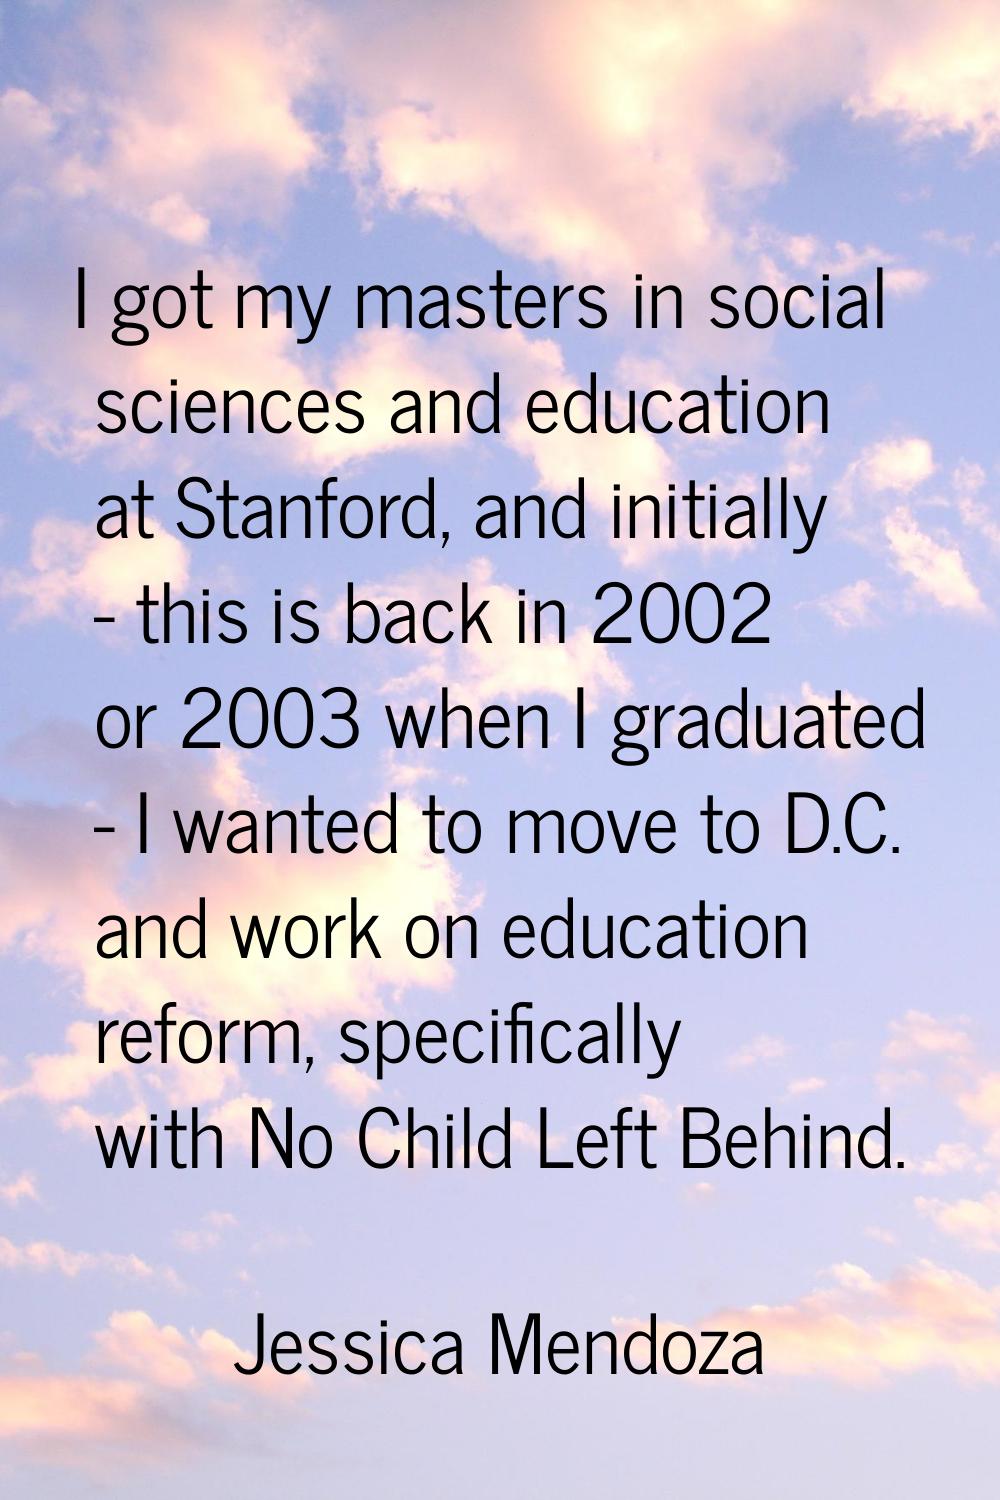 I got my masters in social sciences and education at Stanford, and initially - this is back in 2002